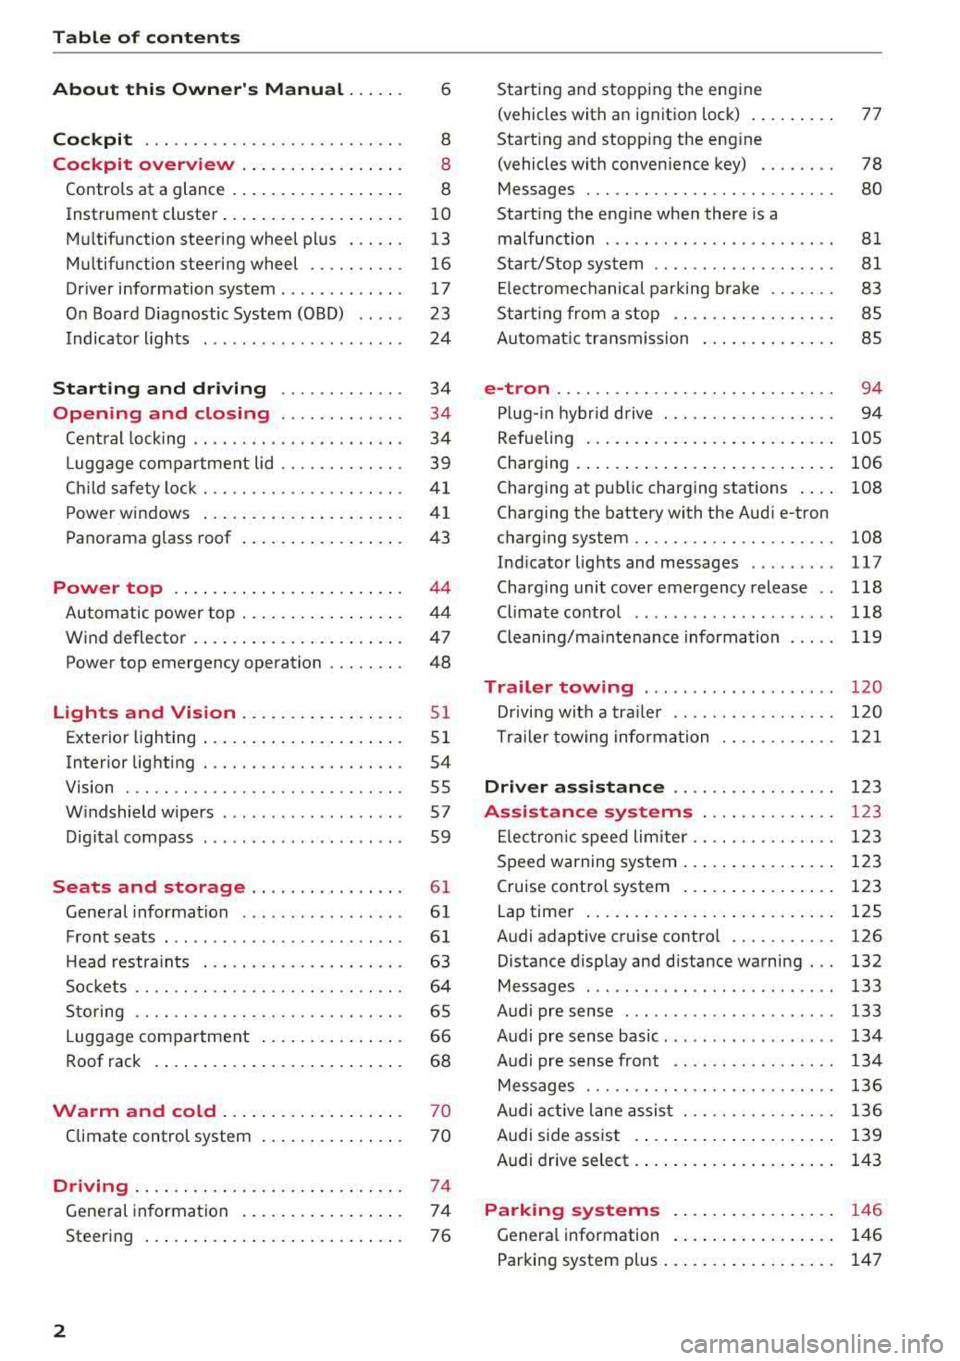 AUDI A3 SEDAN 2017  Owners Manual Table of  content s 
About  this  Owne rs  Manual  . .. .. . 
6 
Cockpi t ... .. ............... .... .. . 8 
Cockpit  overview  . . . . . . .  . . .  . . .  . . . . 8 
Controls  at  a glance  . . . 